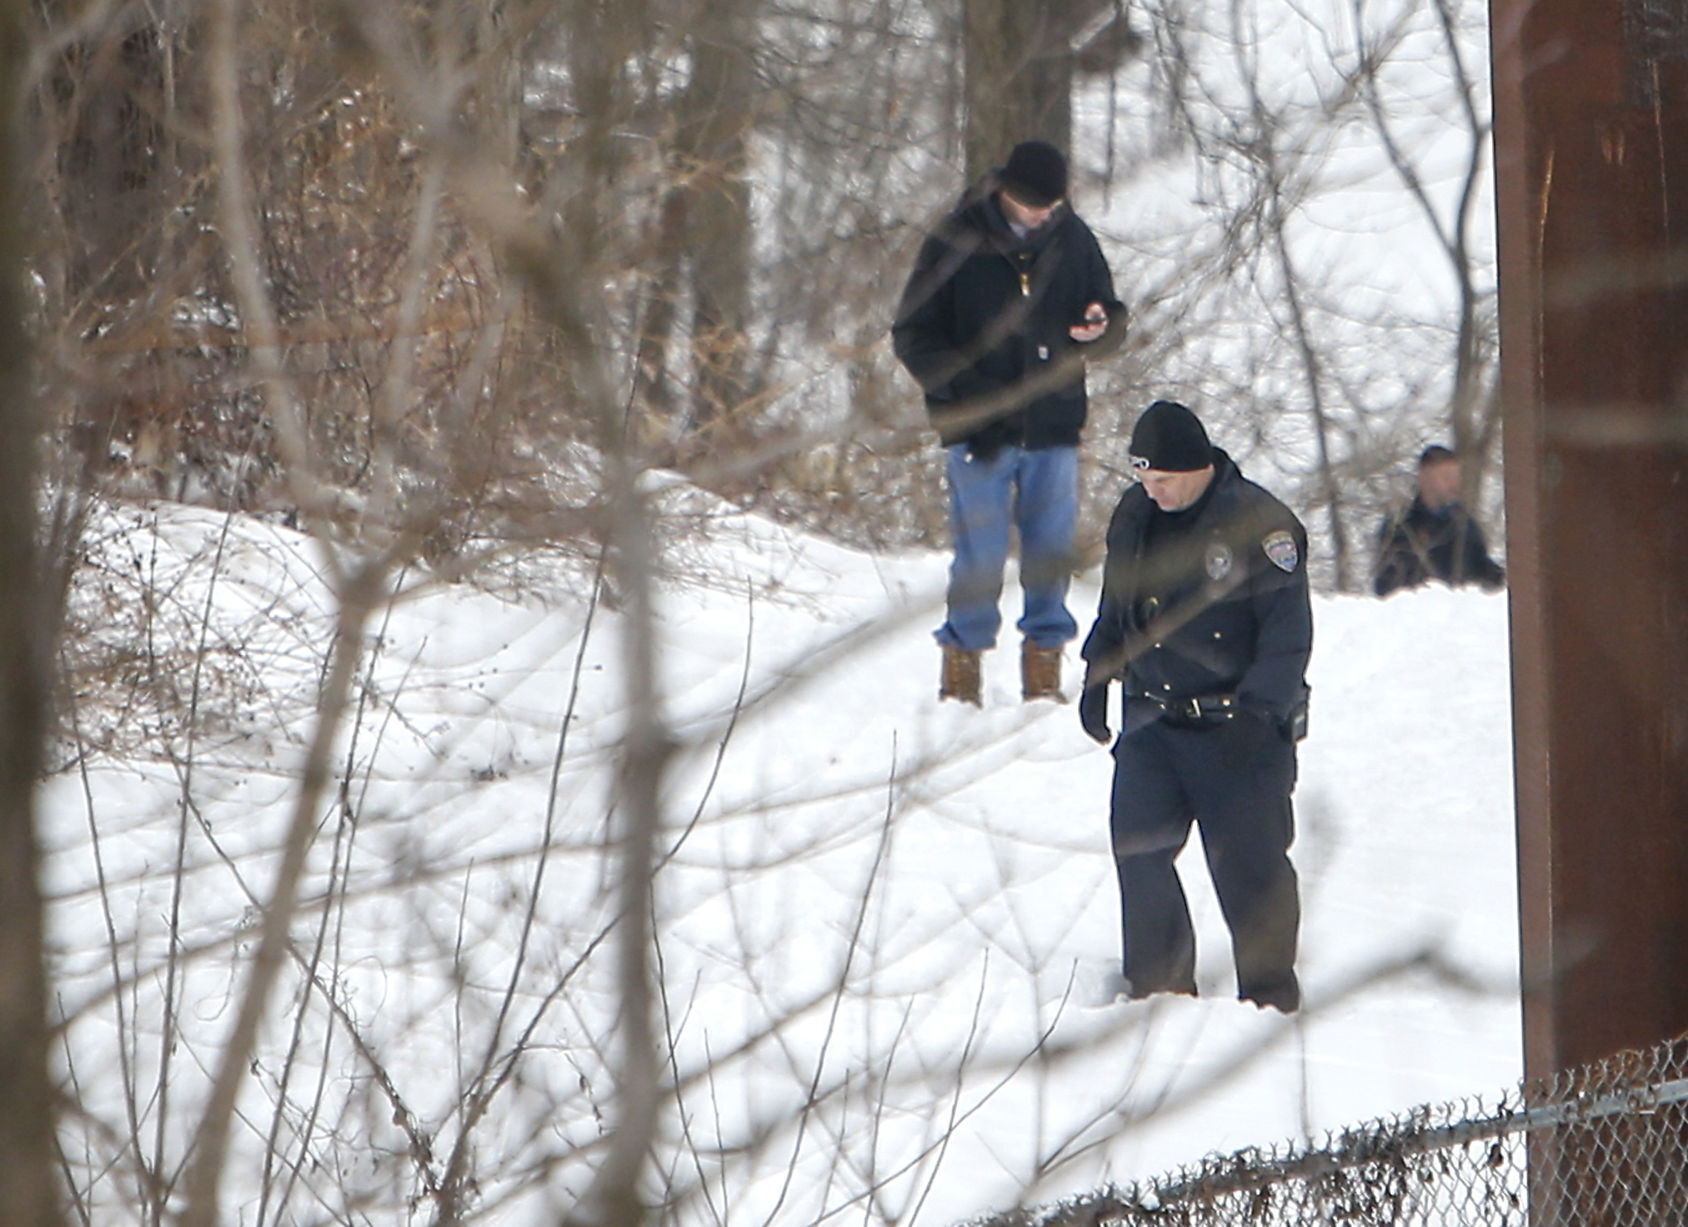 Dubuque police investigate a death at Dubuque Arboretum & Botanical Gardens on Monday, Feb. 1, 2021.    PHOTO CREDIT: Dave Kettering